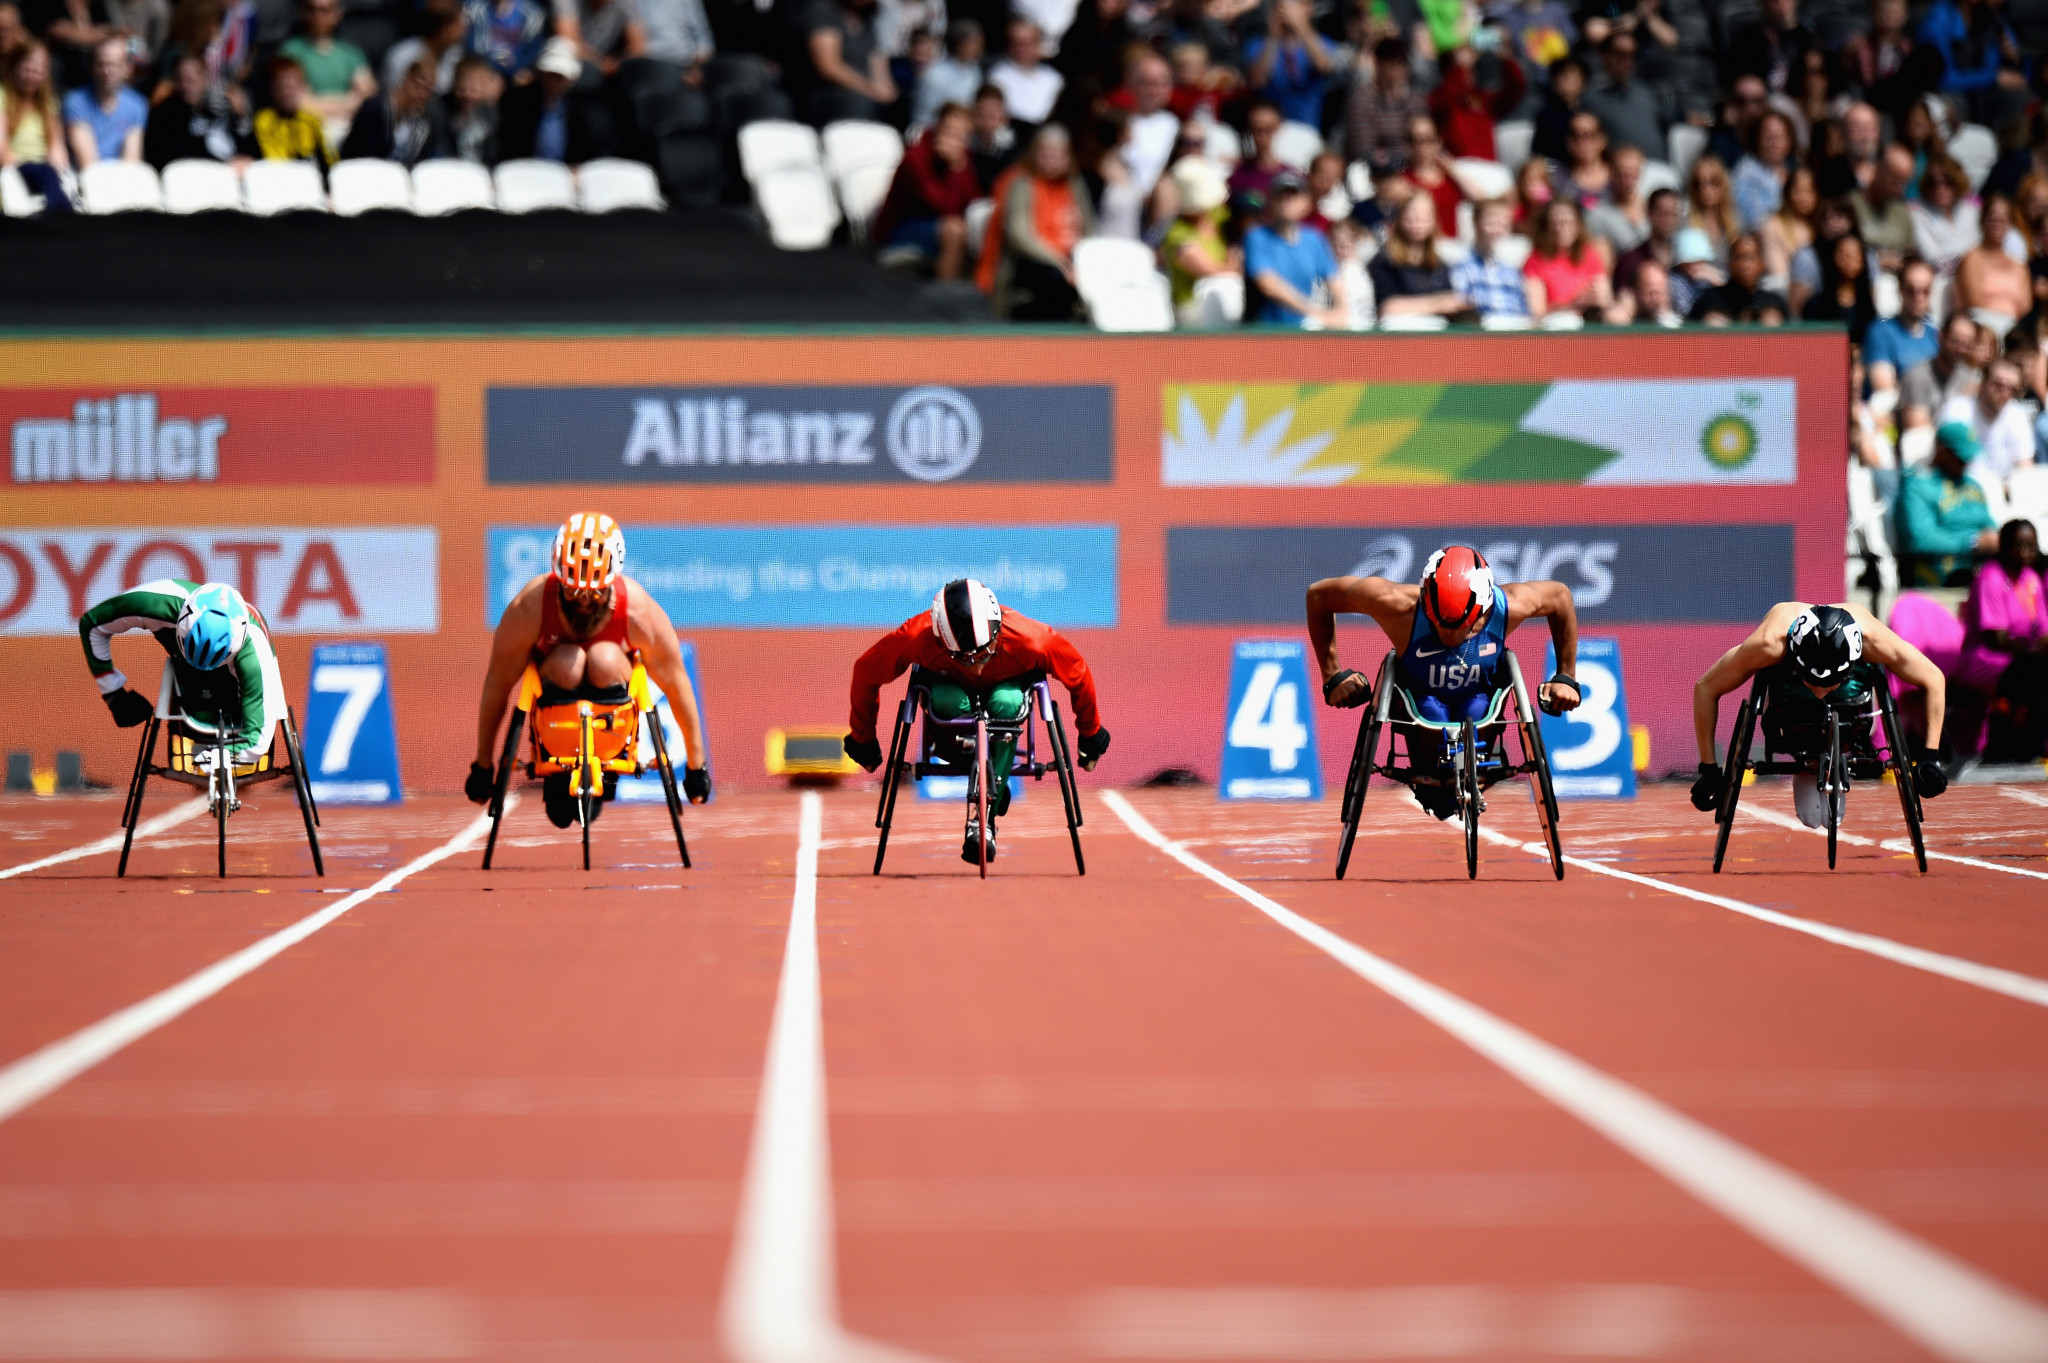 The 2017 World Para Athletics Championships took place in London but, despite the success of the event, the city decided not to bid again for the 2019 edition because of the cost ©Getty Images